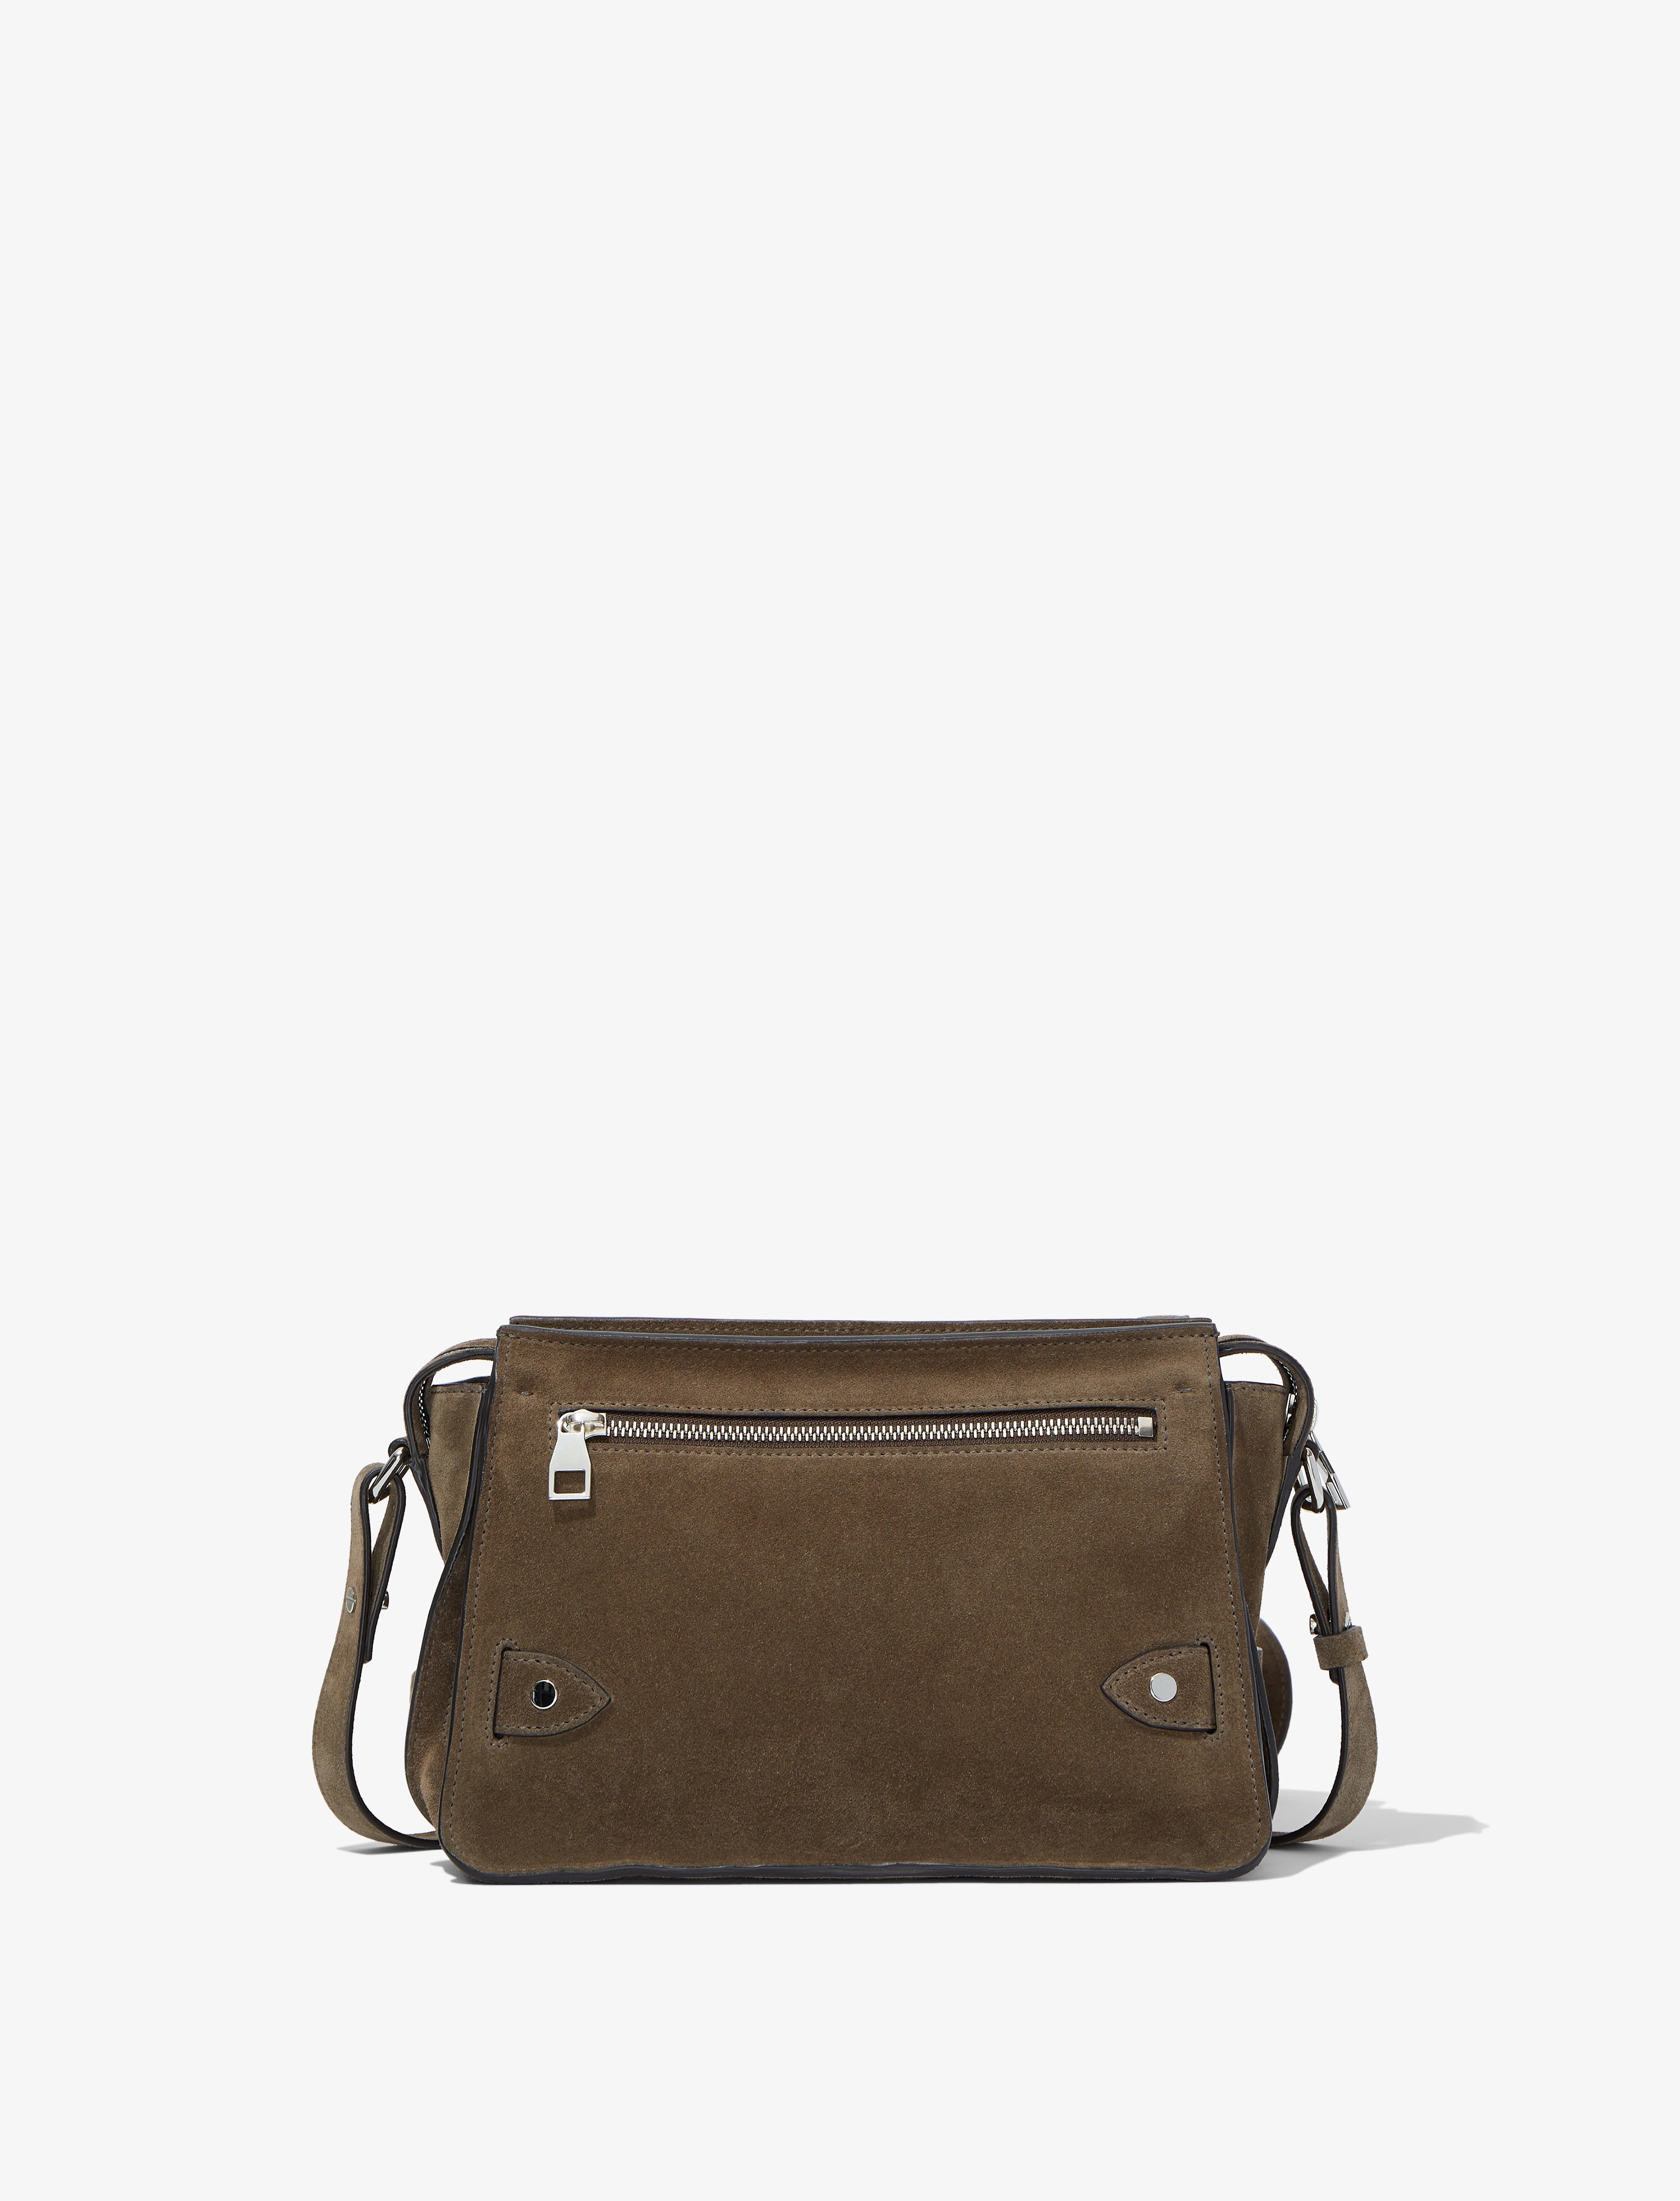 Beacon Saddle Bag in Suede - 4